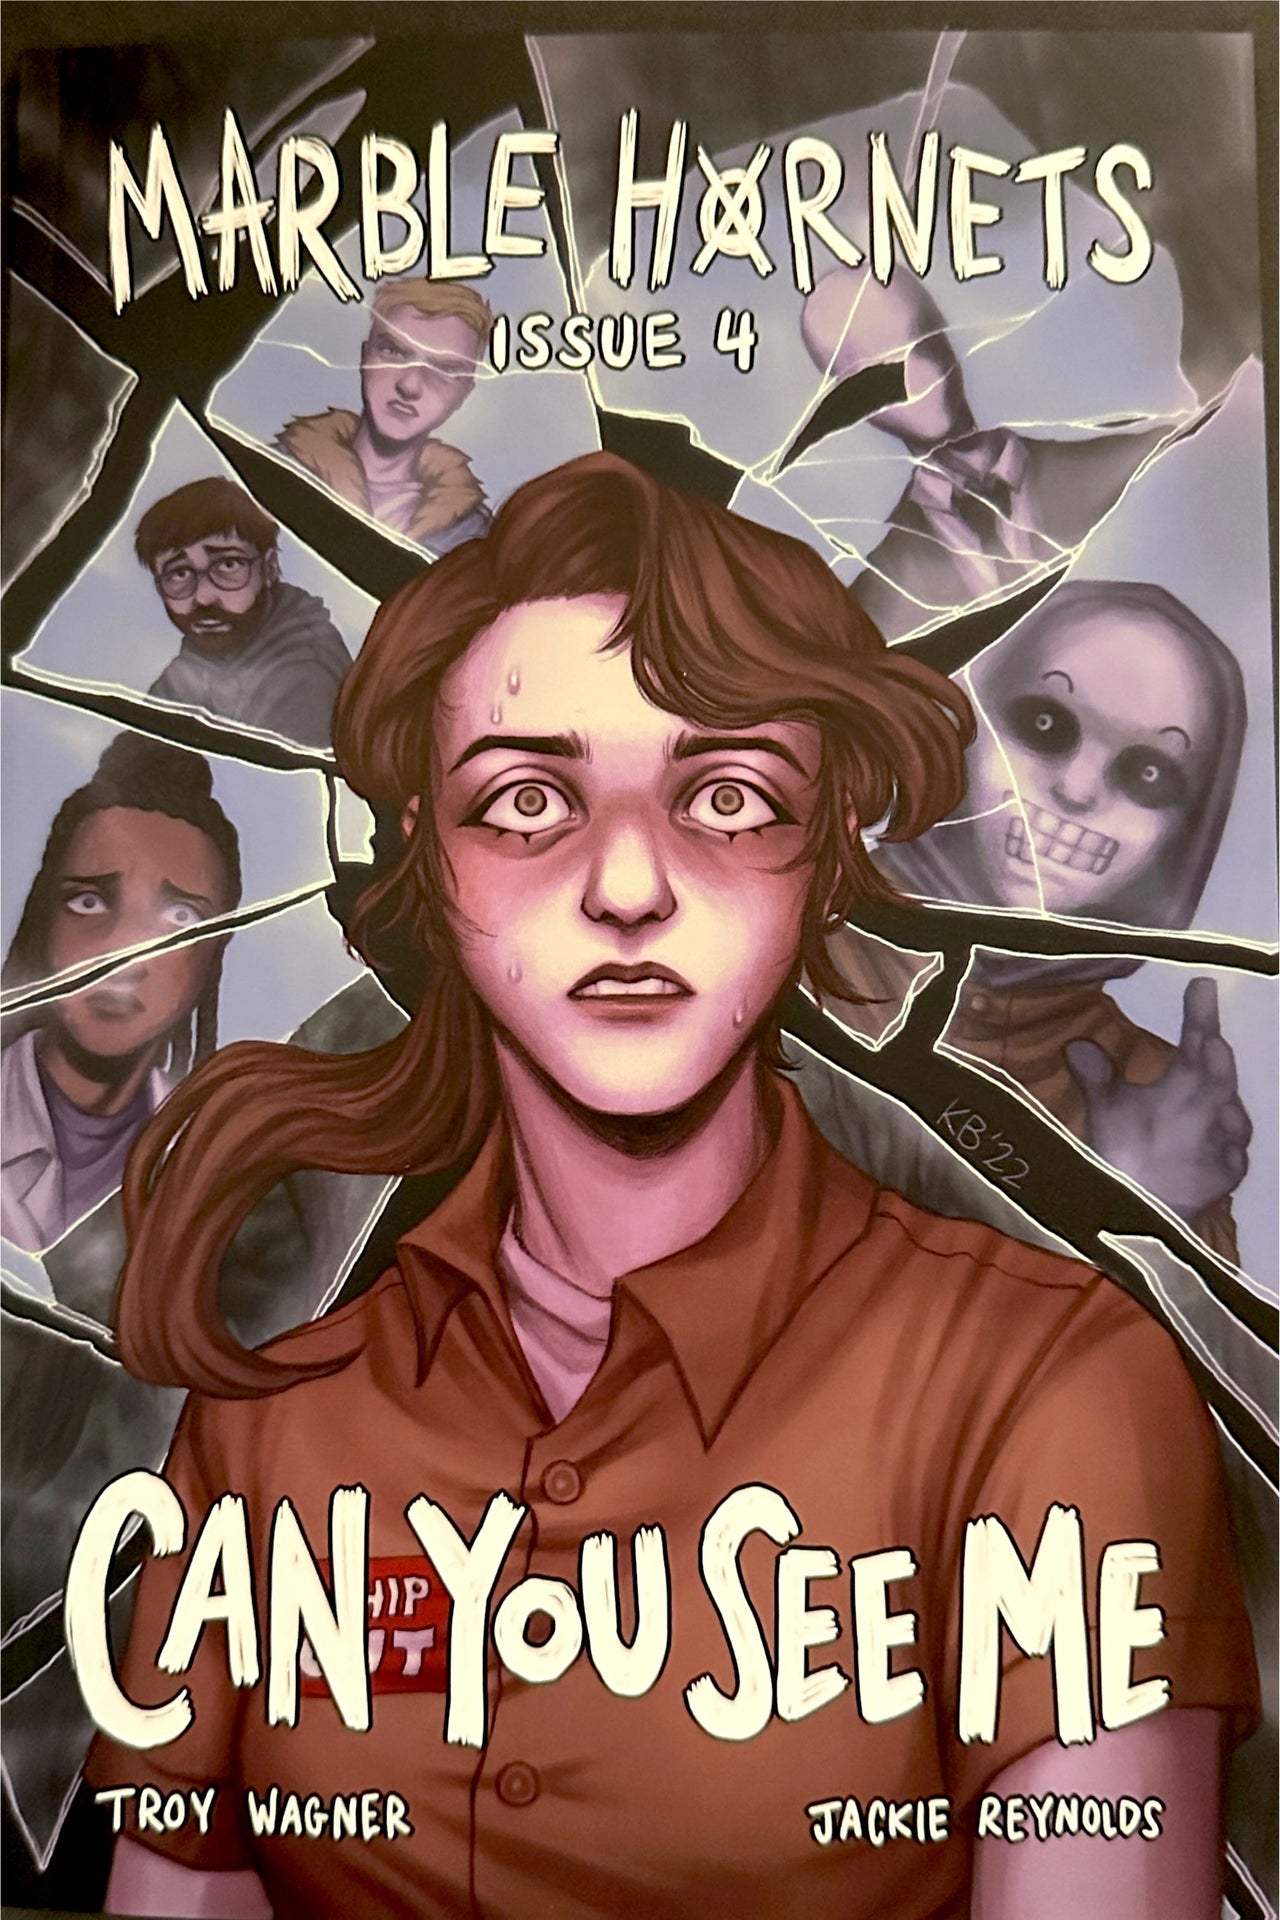 Print Edition - Marble Hornets Issue 4: Can You See Me